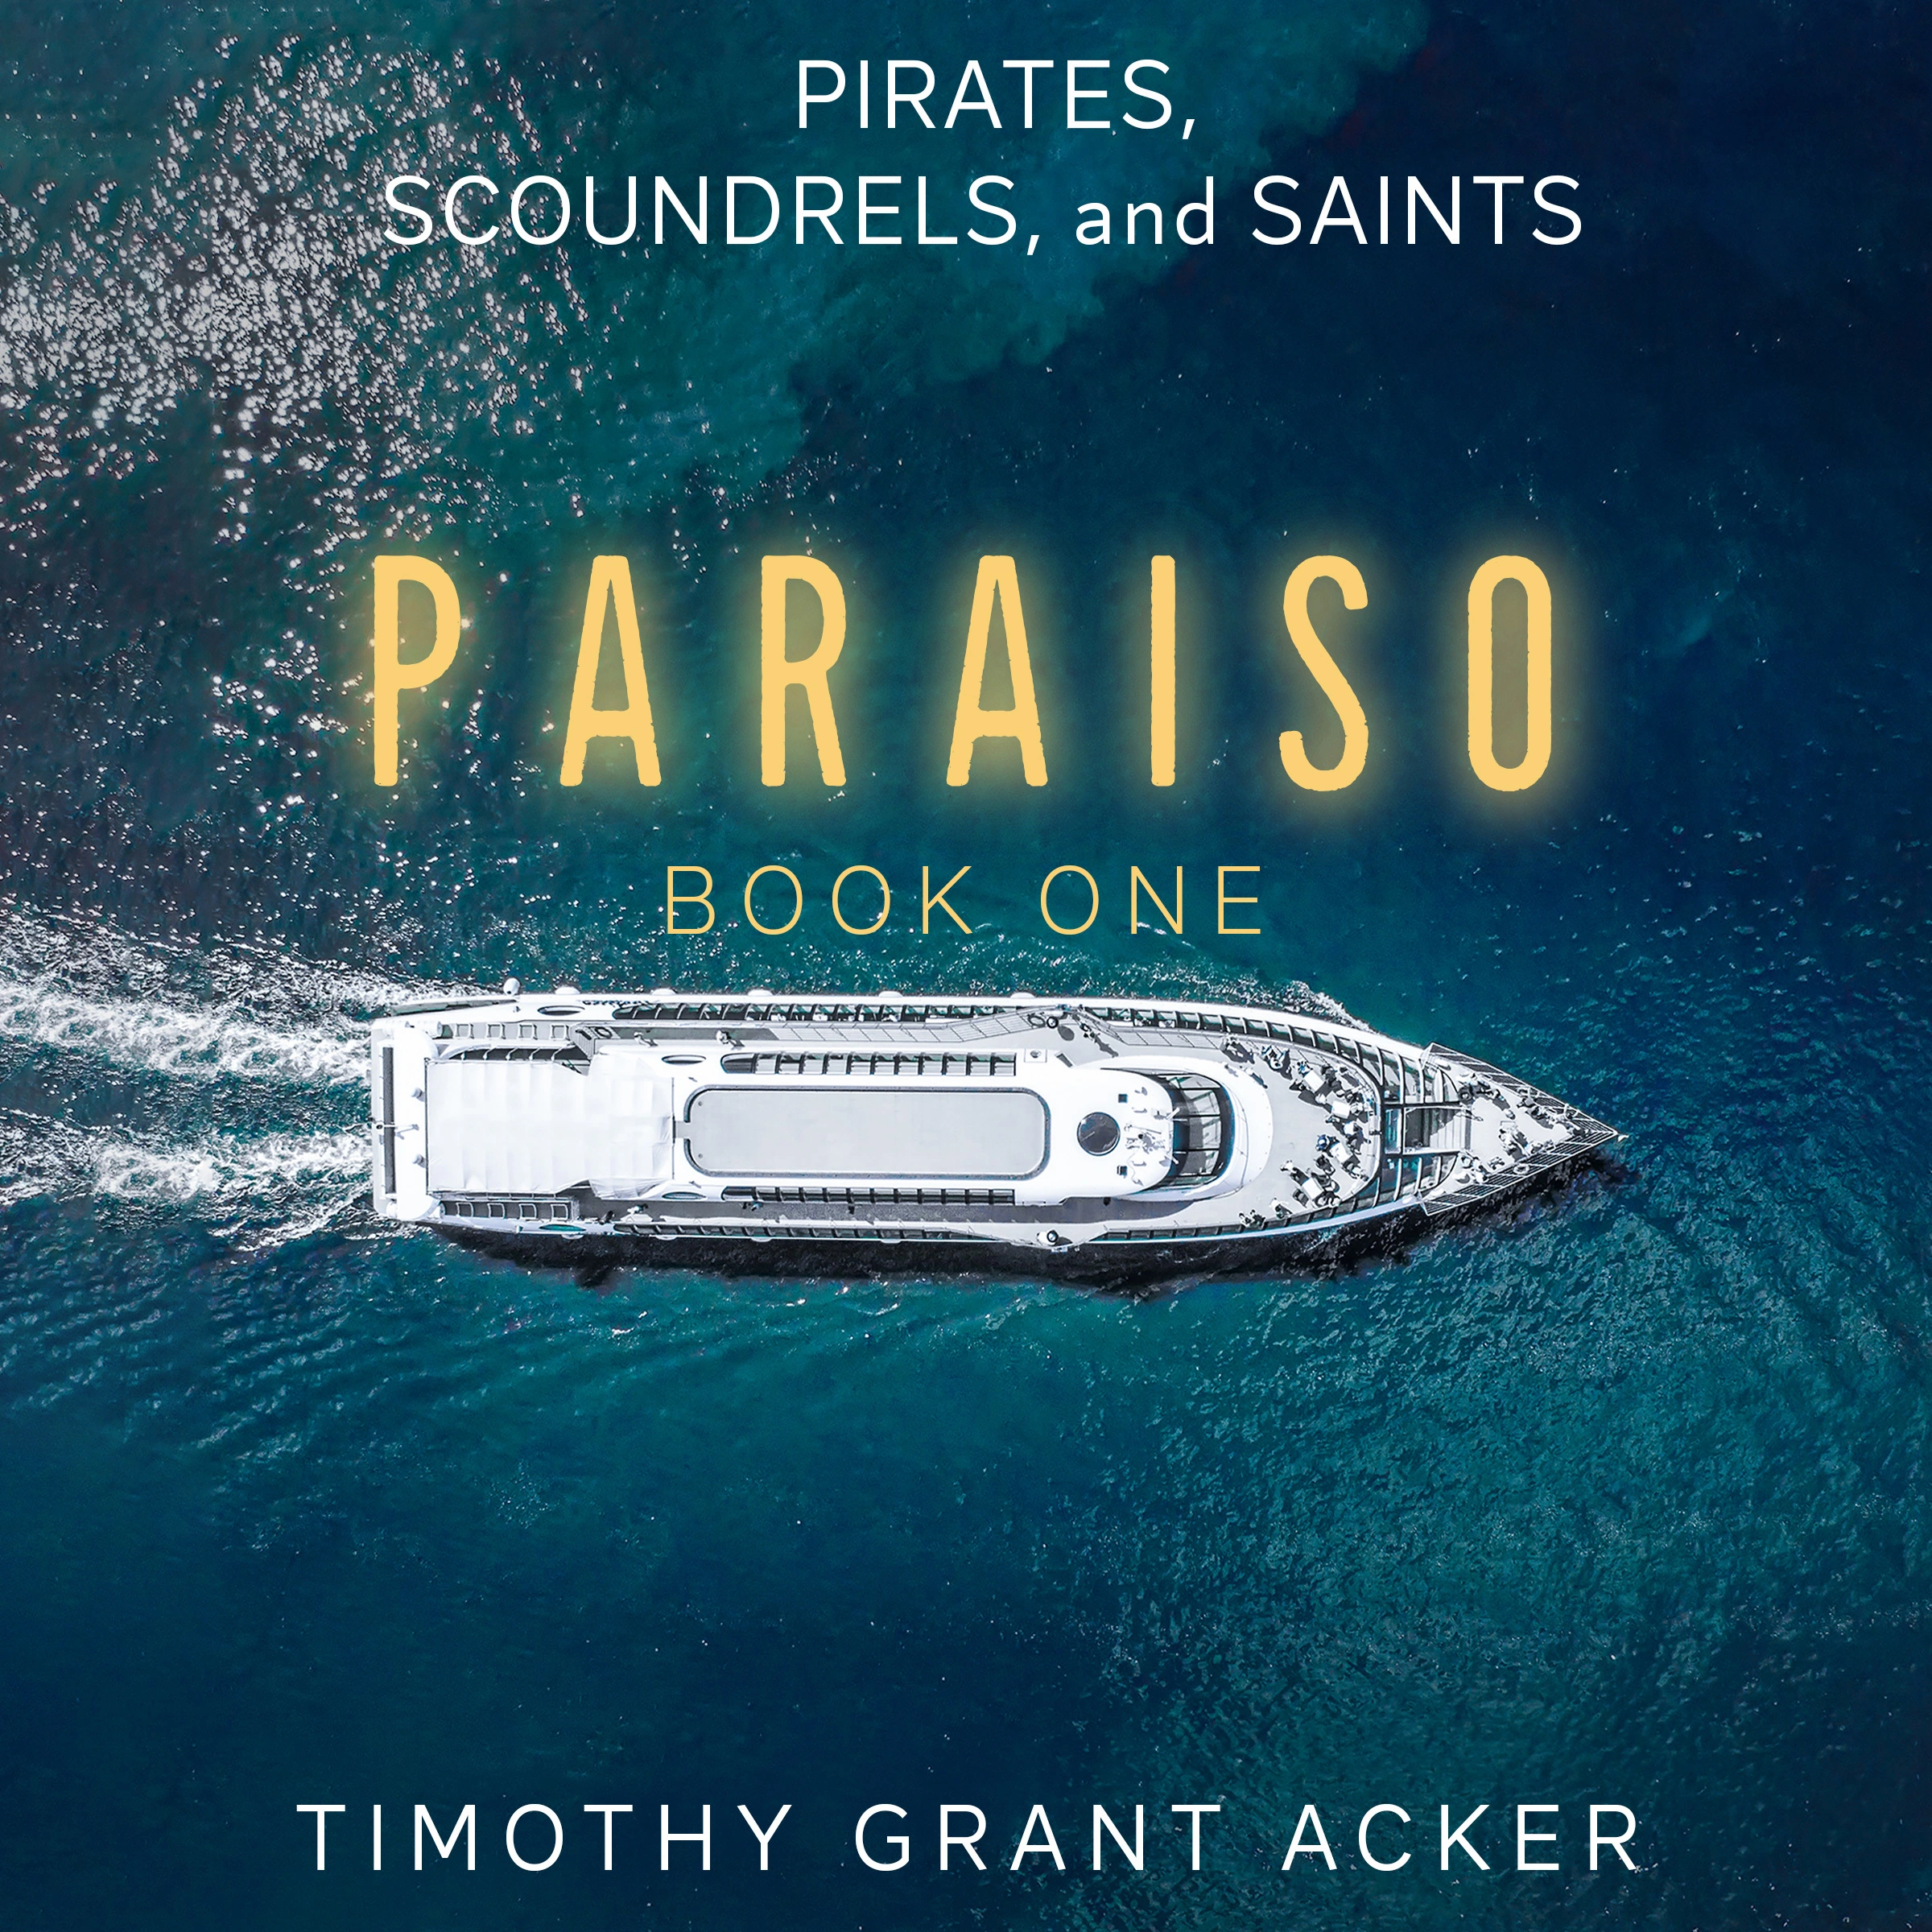 Pirates, Scoundrels, and Saints | PARAISO by Timothy Grant Acker Audiobook